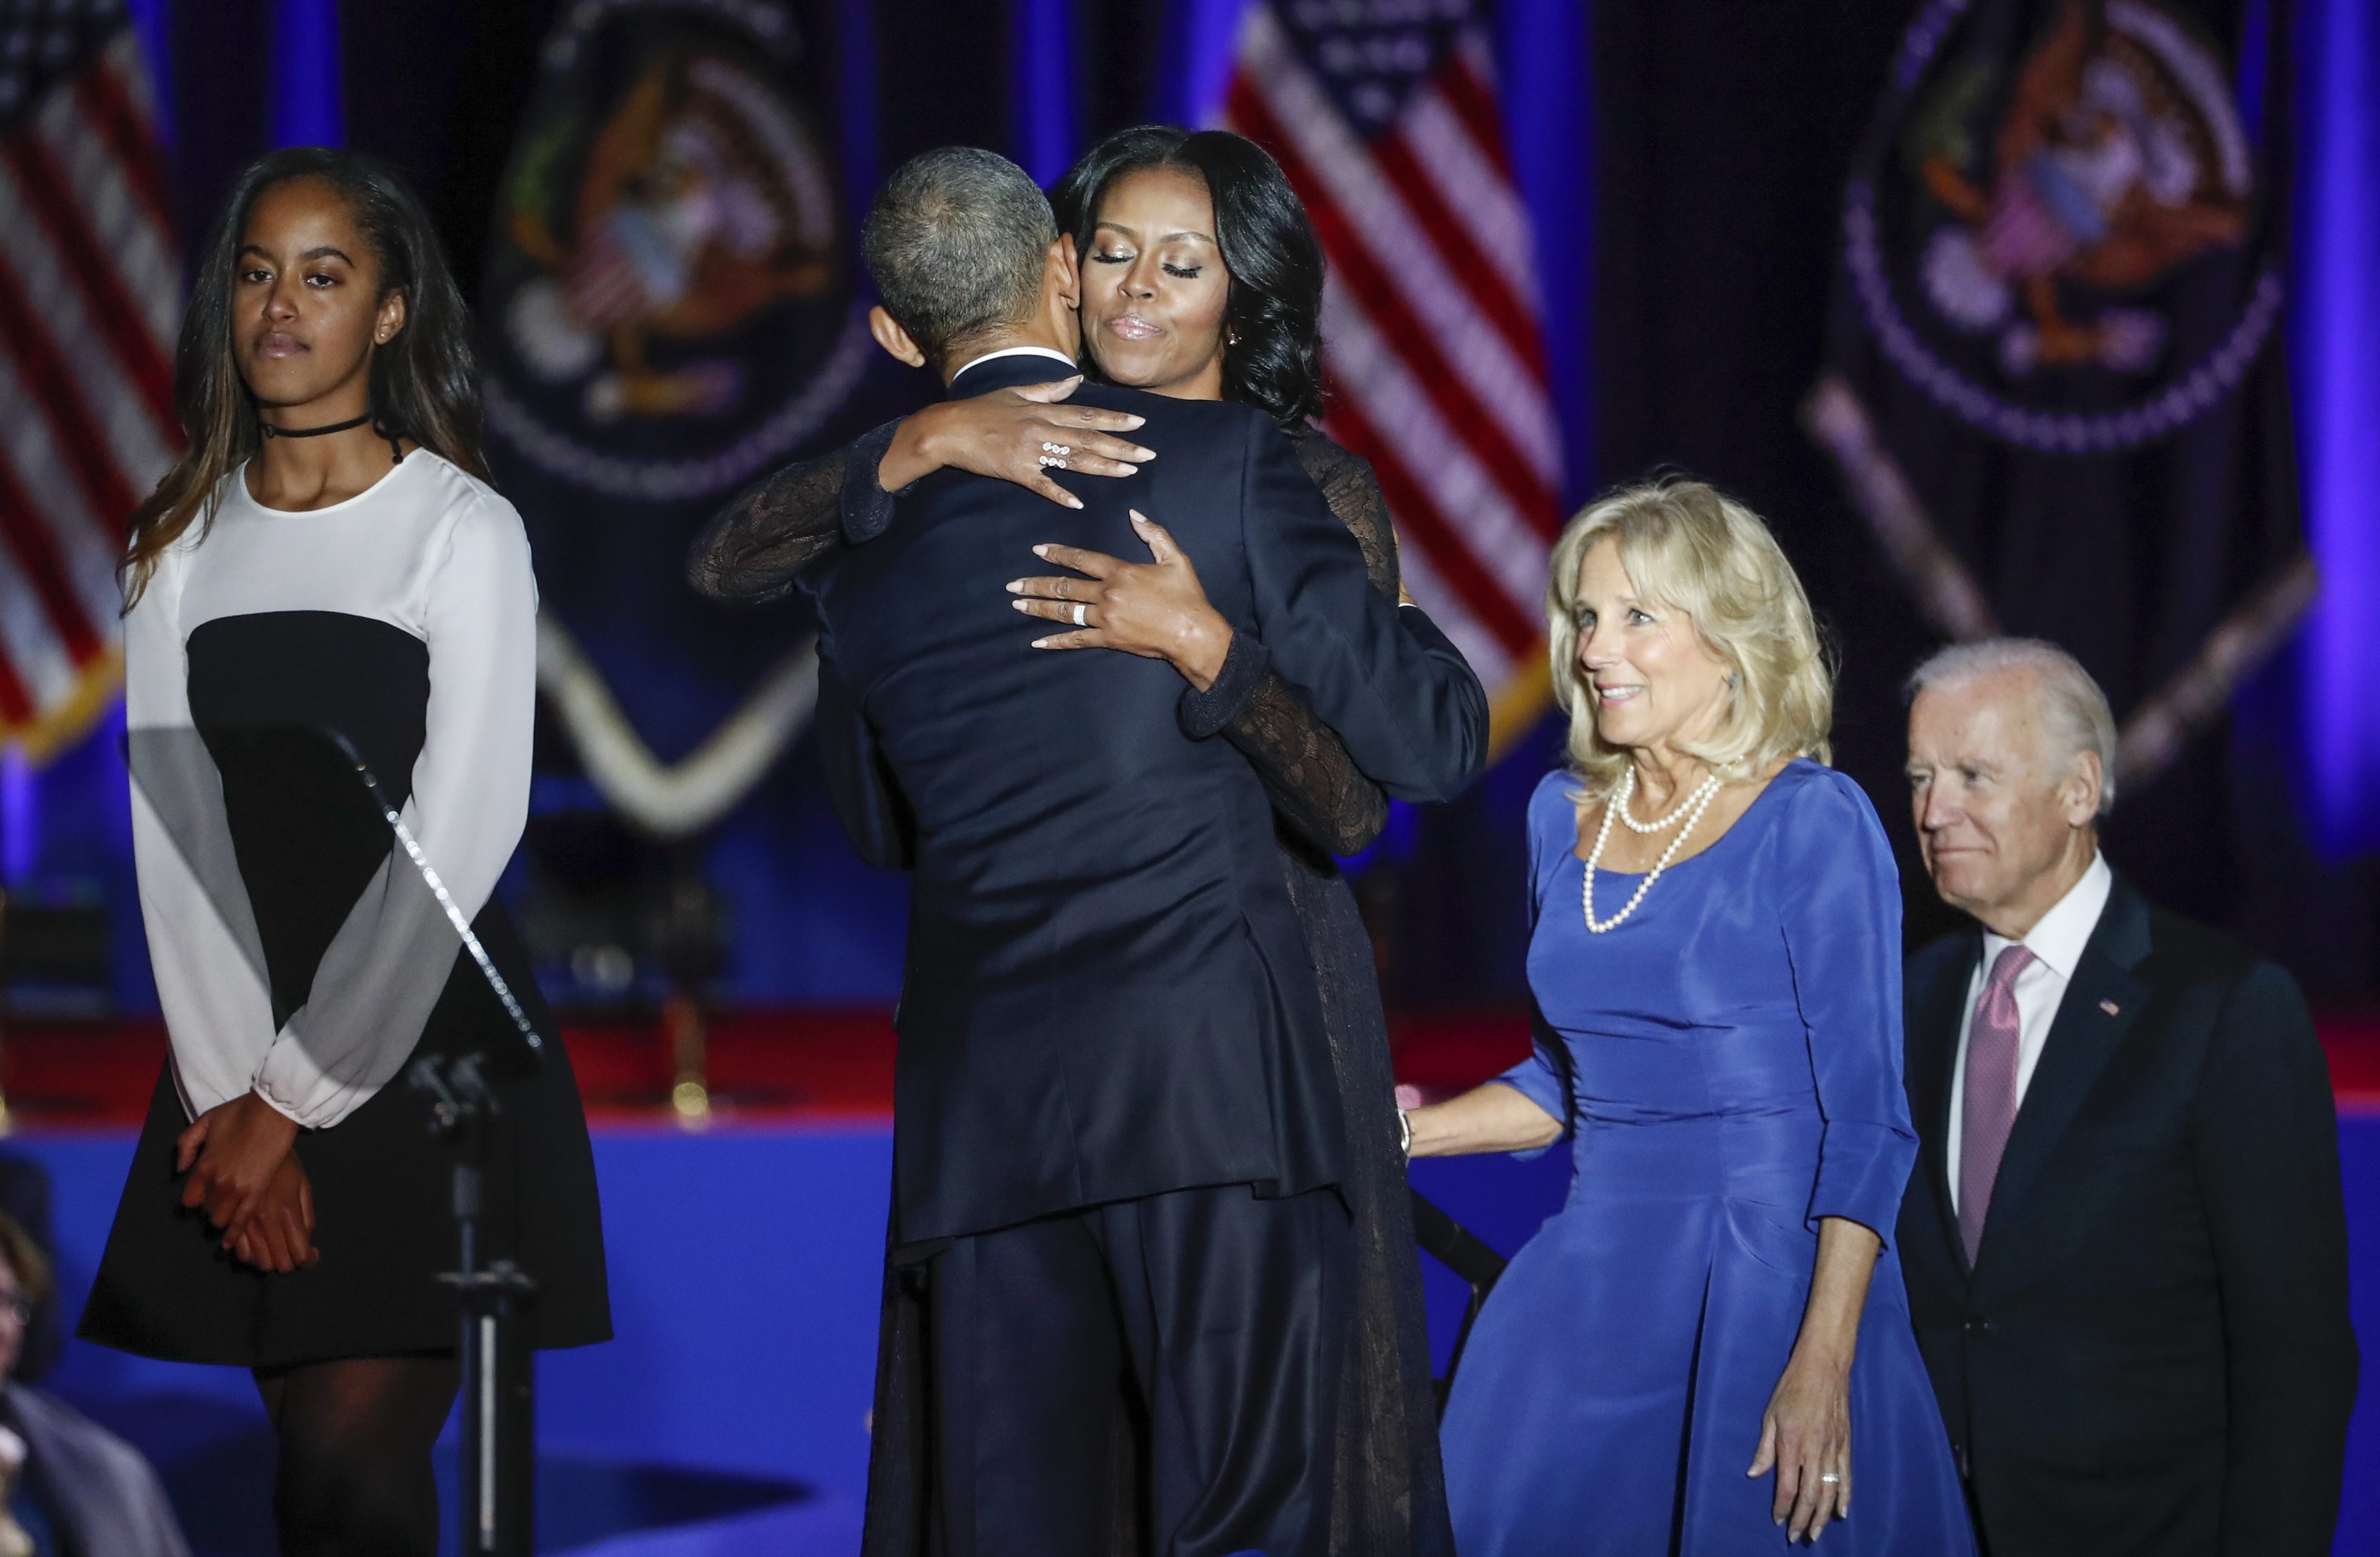 2017-01-10 20:03:15 epa05710204 First lady Michelle Obama (C-R) hugs US President Barack Obama (C-L) after his farewell address to the American people at McCormick Place in Chicago, Illinois, USA, 10 January 2017. Obama's eight year term as president of the USA ends on 20 January when President-elect Donald Trump takes the oath of office. EPA/KAMIL KRZACZYNSKI